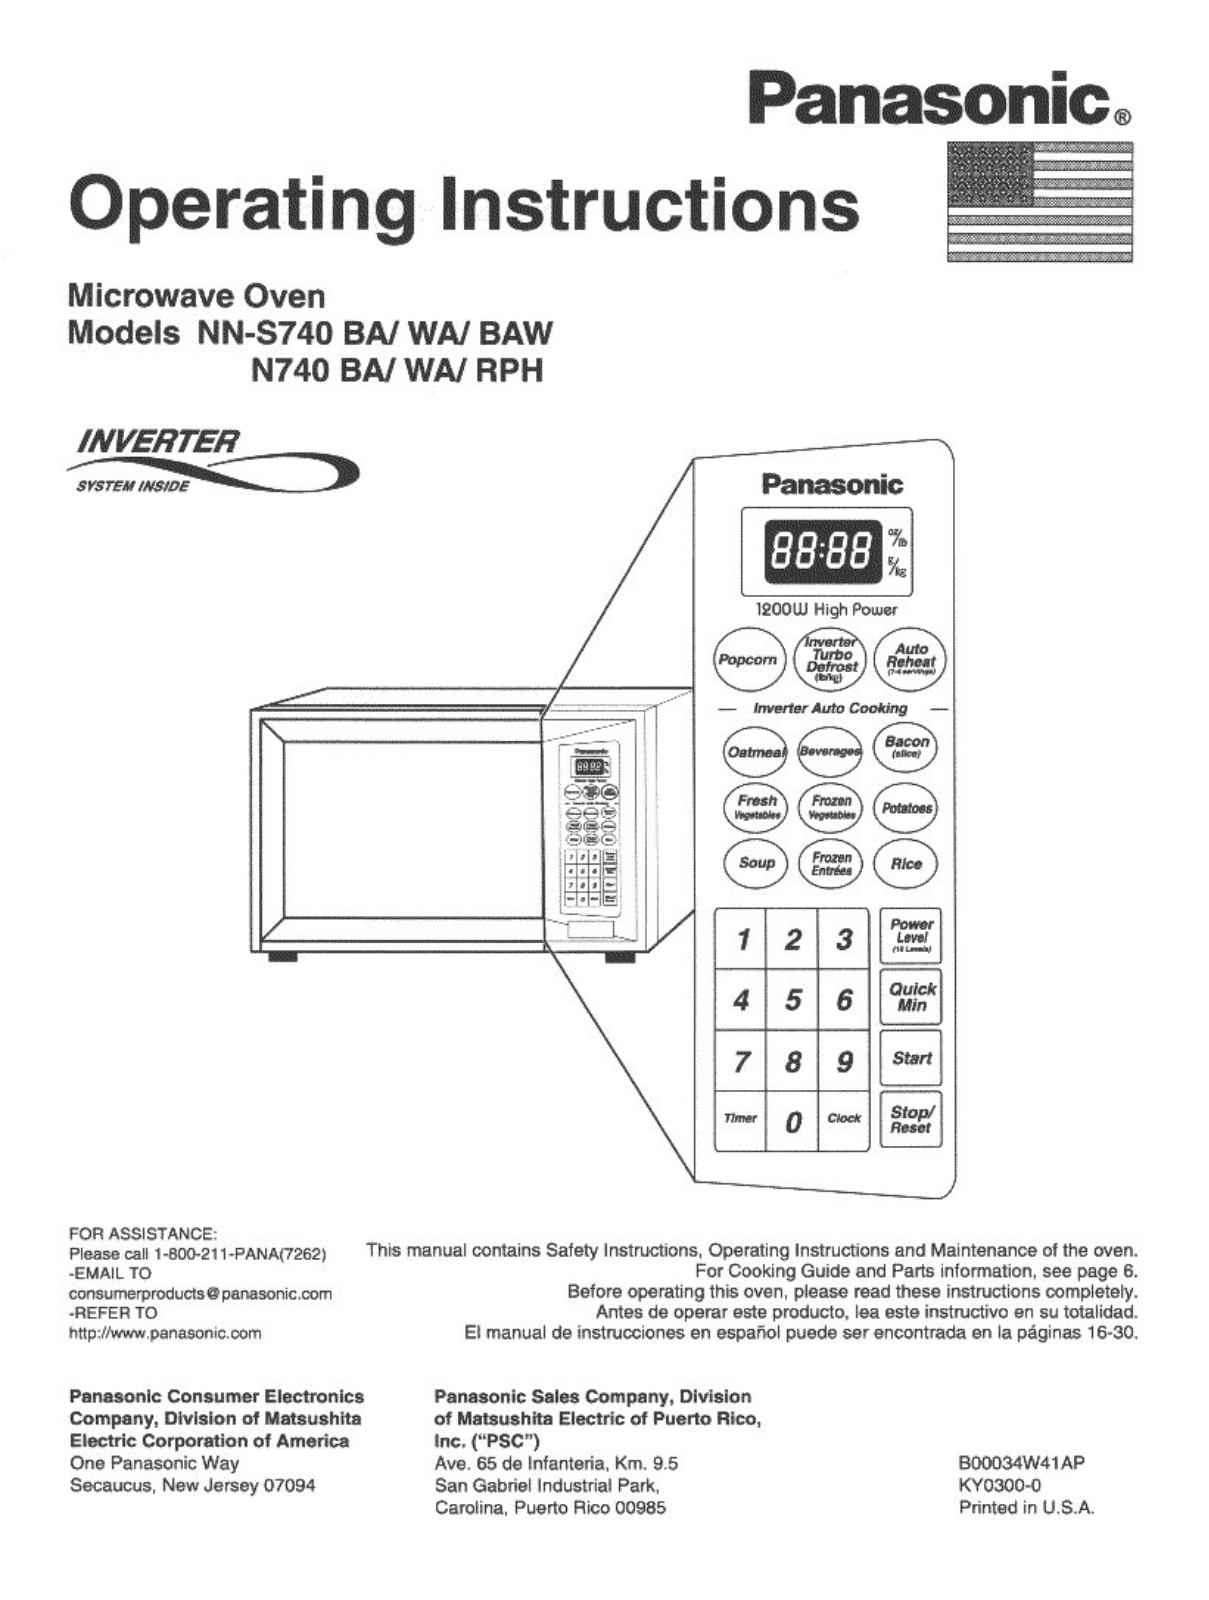 Panasonic Nn-n740rph, Nn-n740ba, Nn-n740wa, Nn-s740wa, Nn-s740baw Owner's Manual